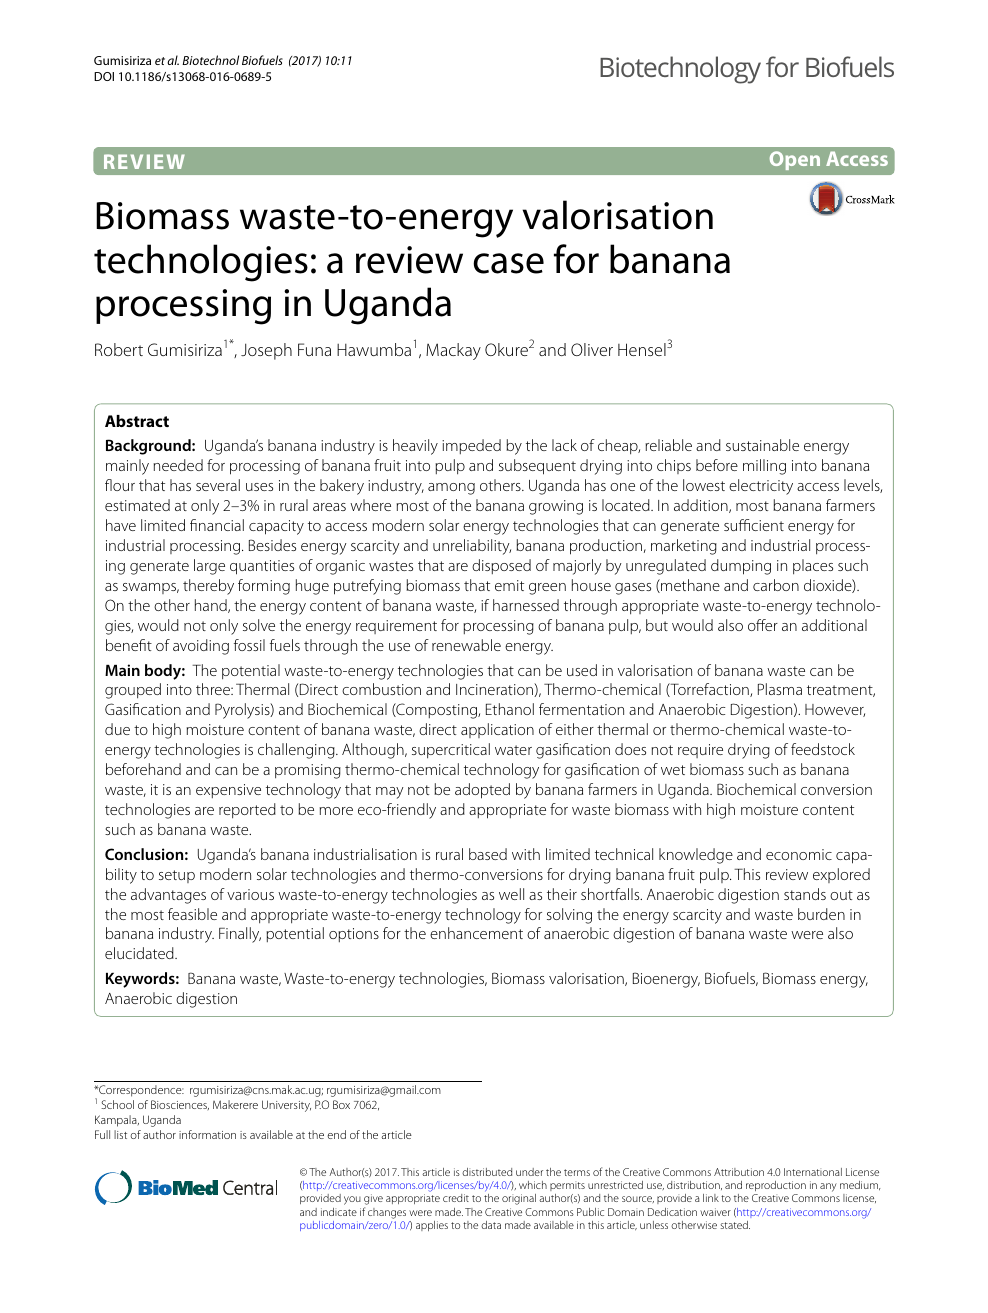 Biomass Waste To Energy Valorisation Technologies A Review Case